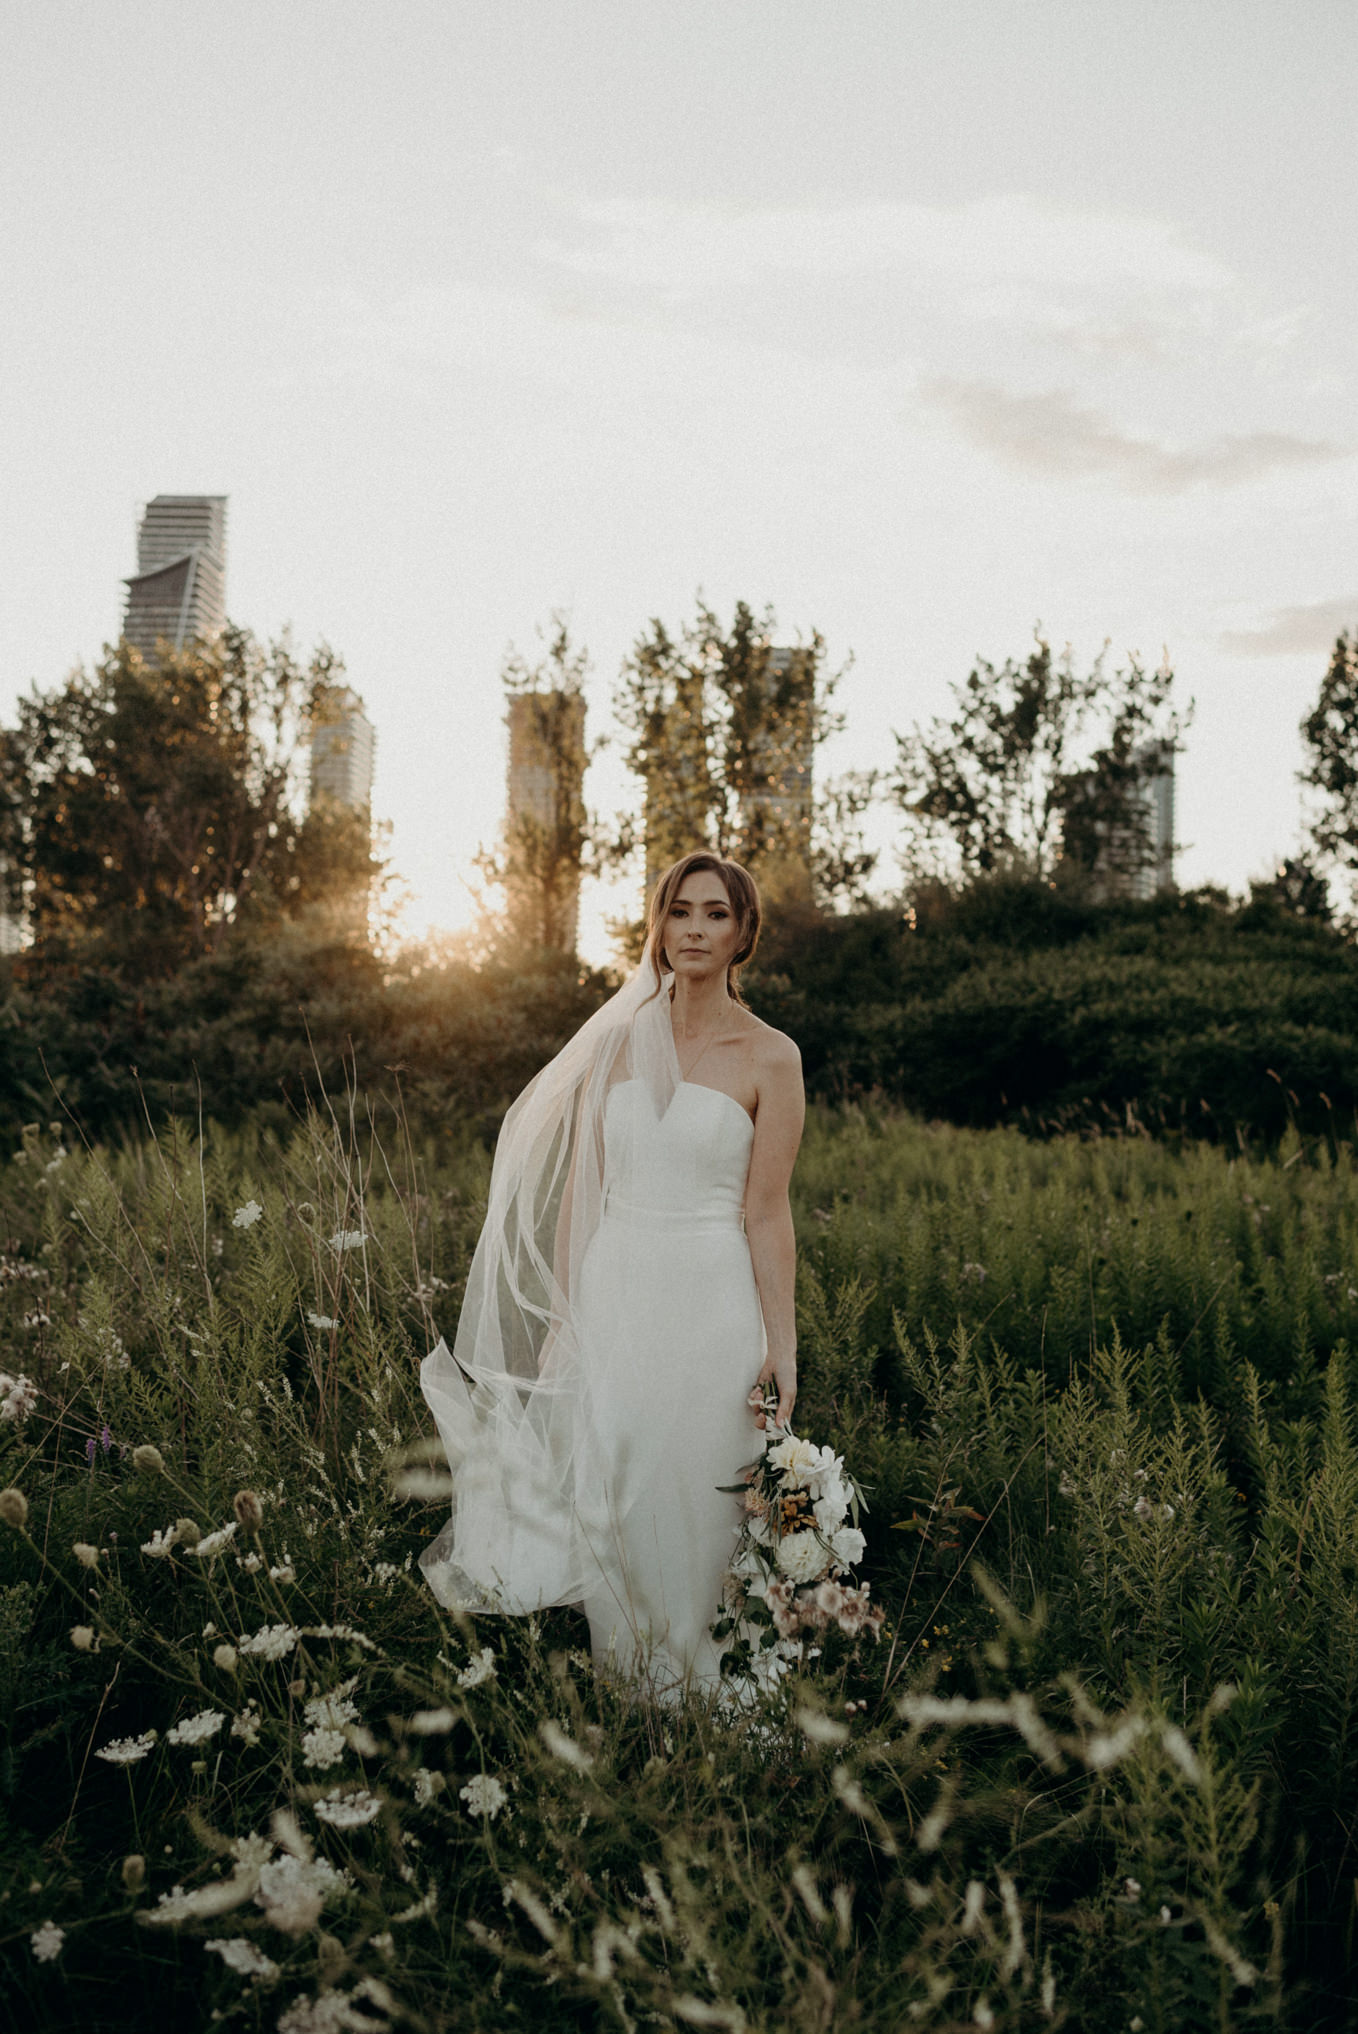 bride with sunset and condo buildings in background at Humber Bay. Toronto elopement portraits.